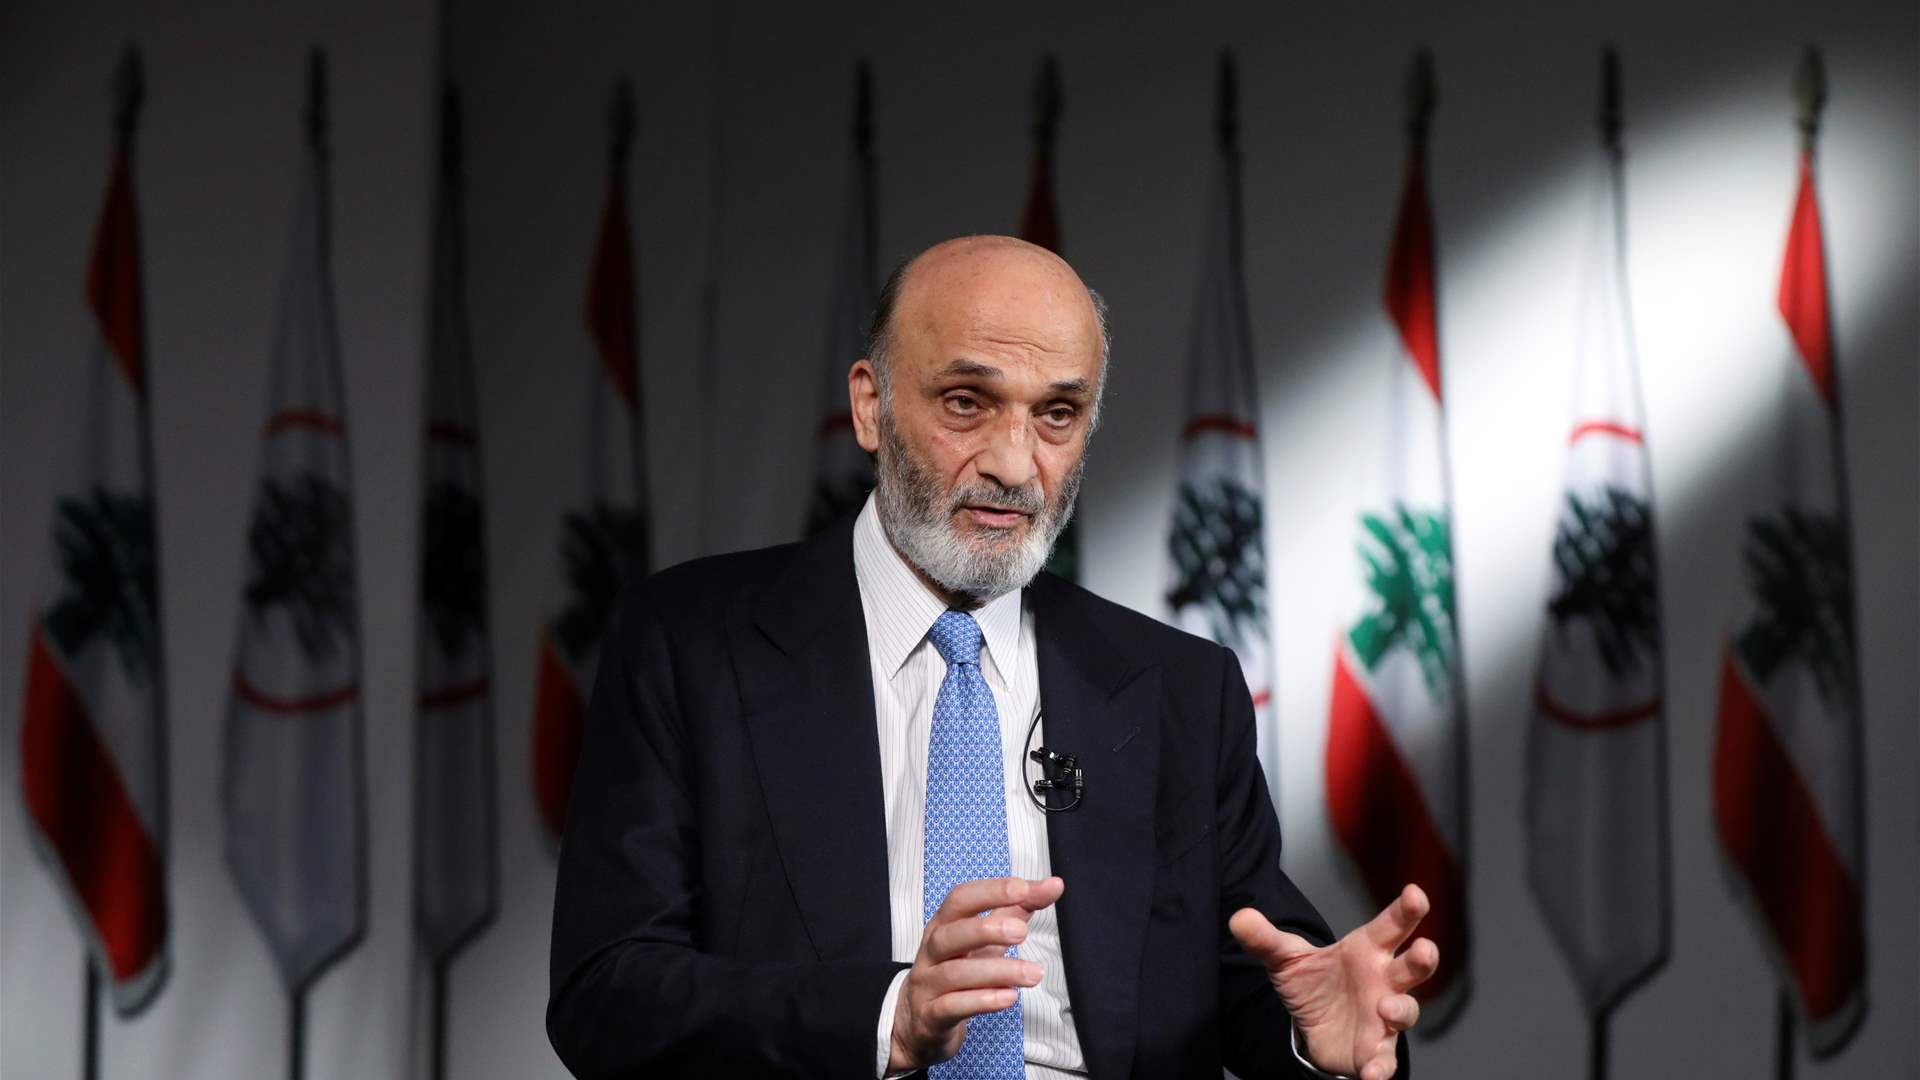 Geagea met with Shea: Opportunities for the Resistance Bloc&#39;s presidential candidate are nonexistent